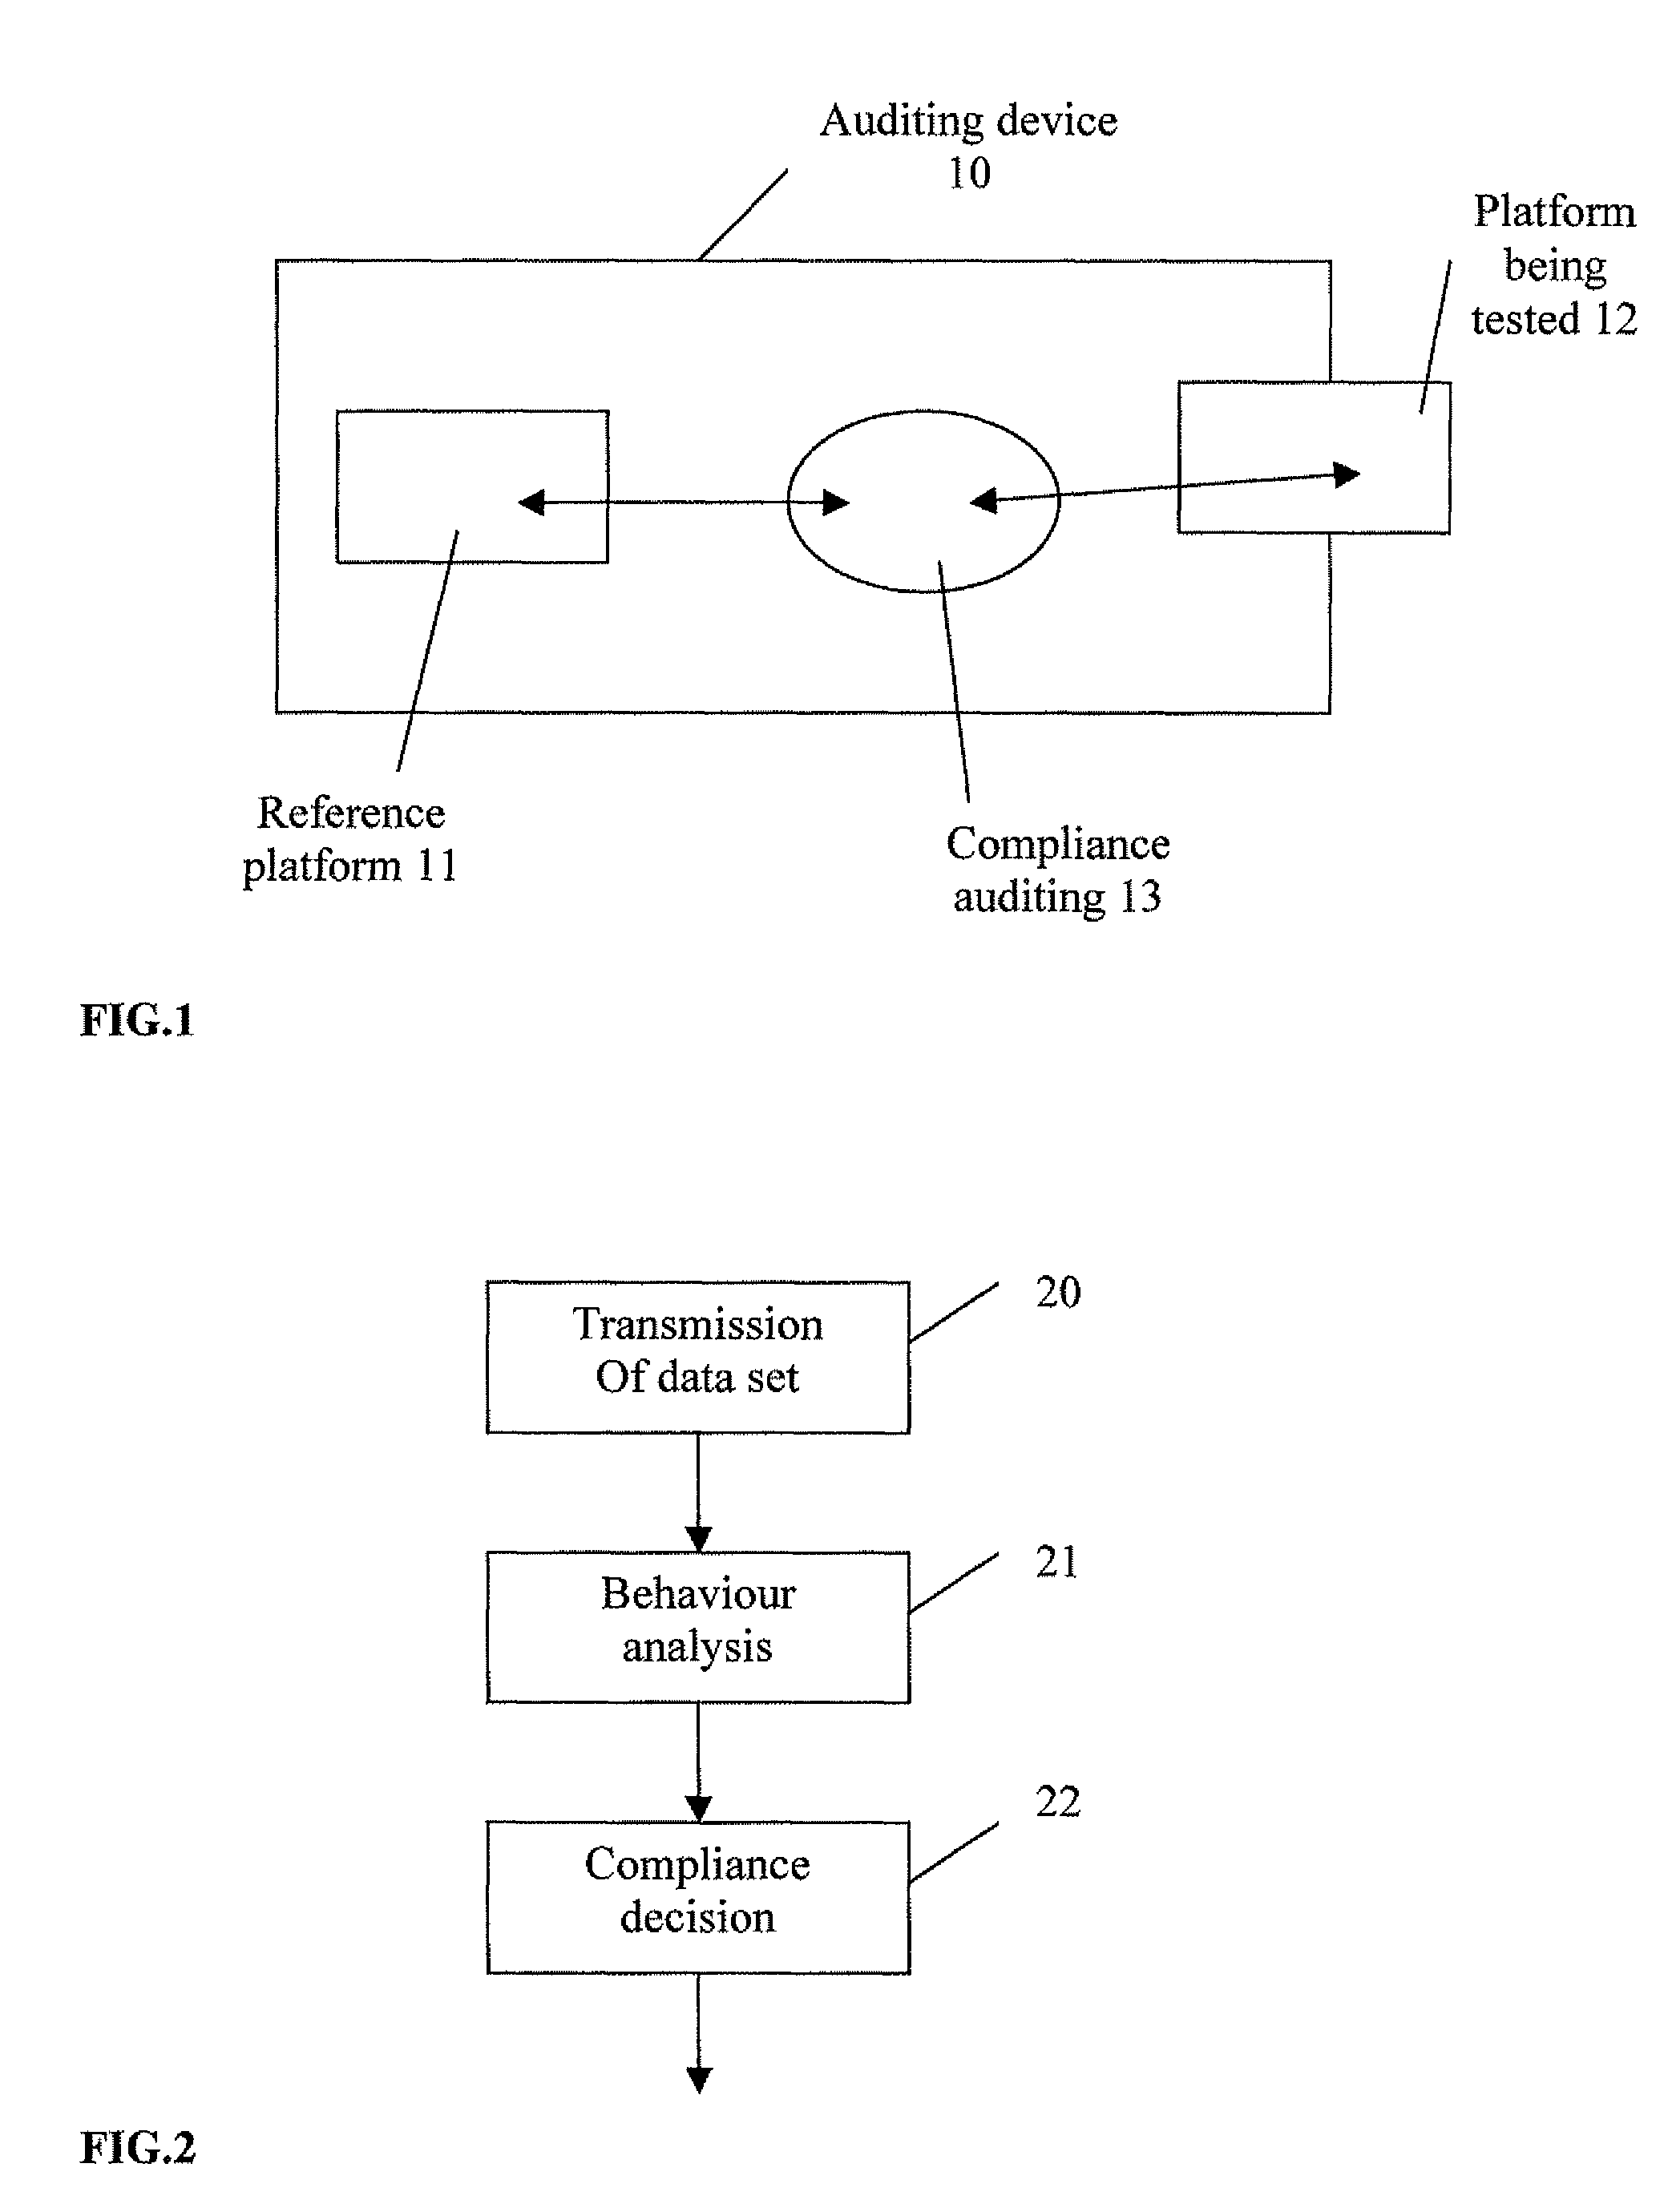 Method for auditing compliance of an electronic platform and/or a computer program present on said platform, and device and computer program corresponding thereto